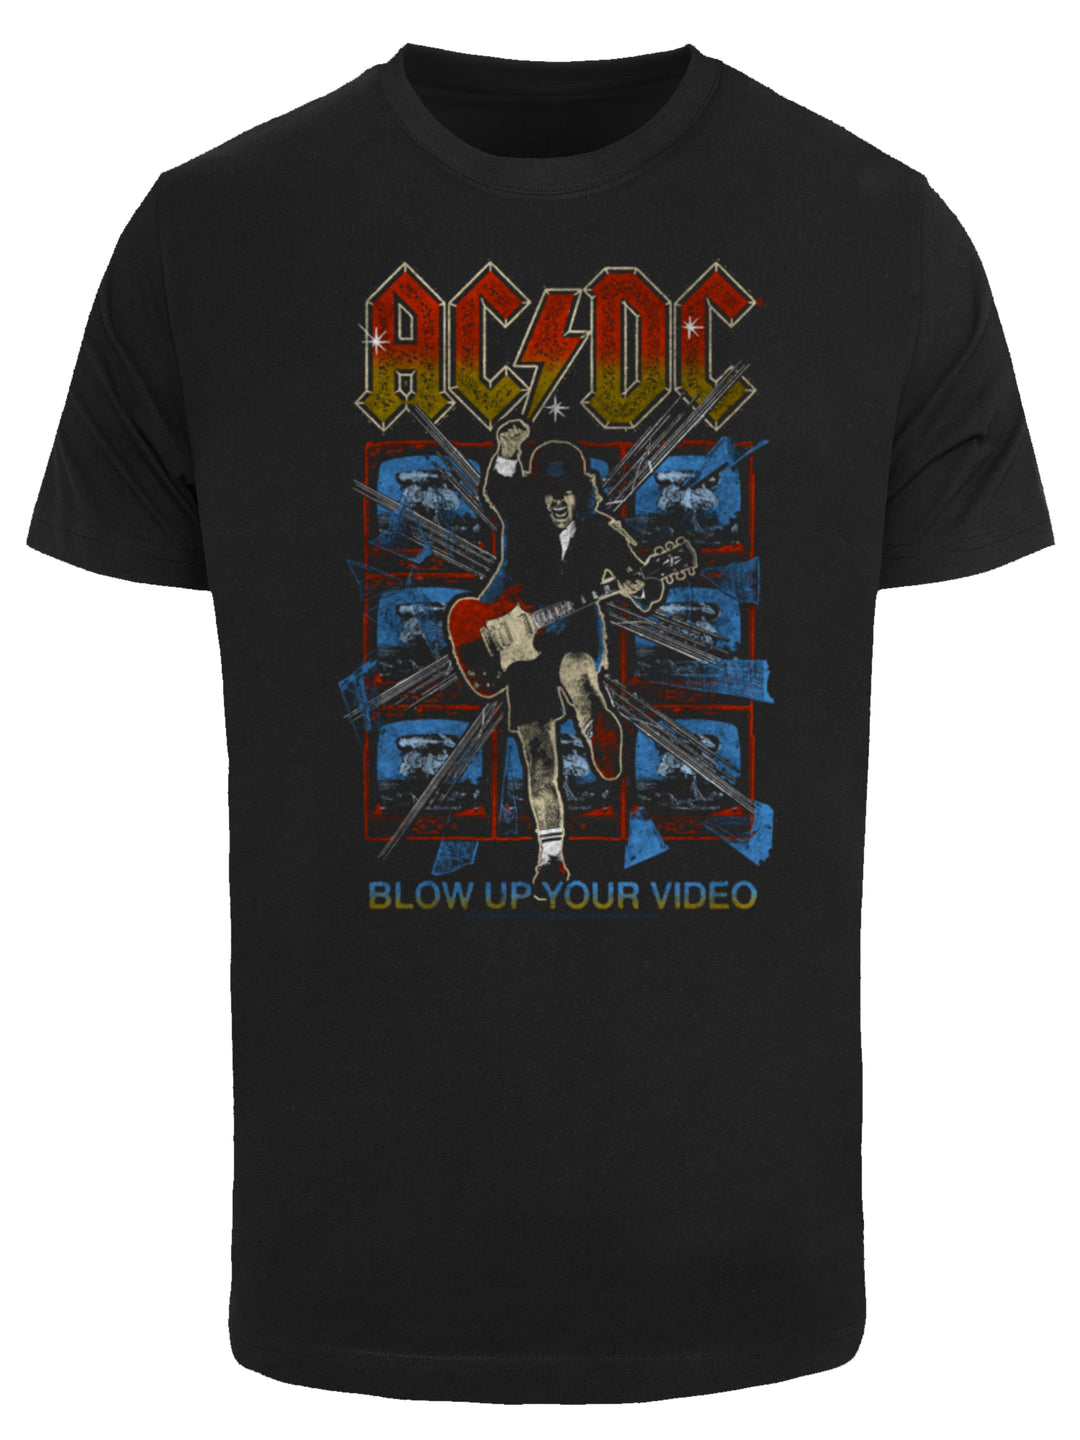 AC/DC Blow Up Your Video Round Neck T-Shirt - A Rock N' Roll Statement